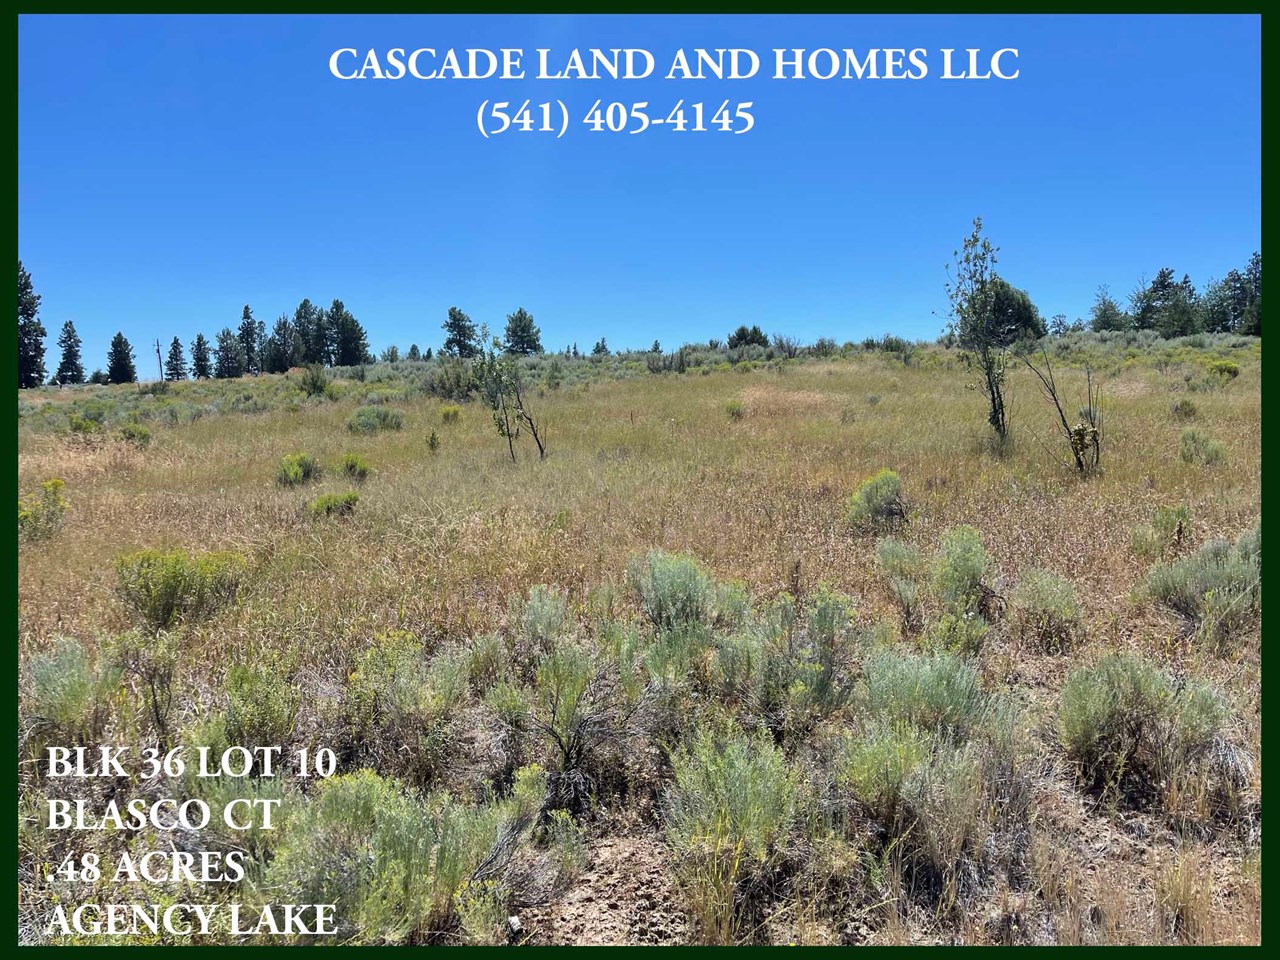 the property slopes gently uphill from the road, and is blanketed in rabbit brush, sage and native grasses. the property has beautiful territorial views of the pastureland and foothills that lead to the shores of agency lake. in the spring the entire area is covered in wildflowers!